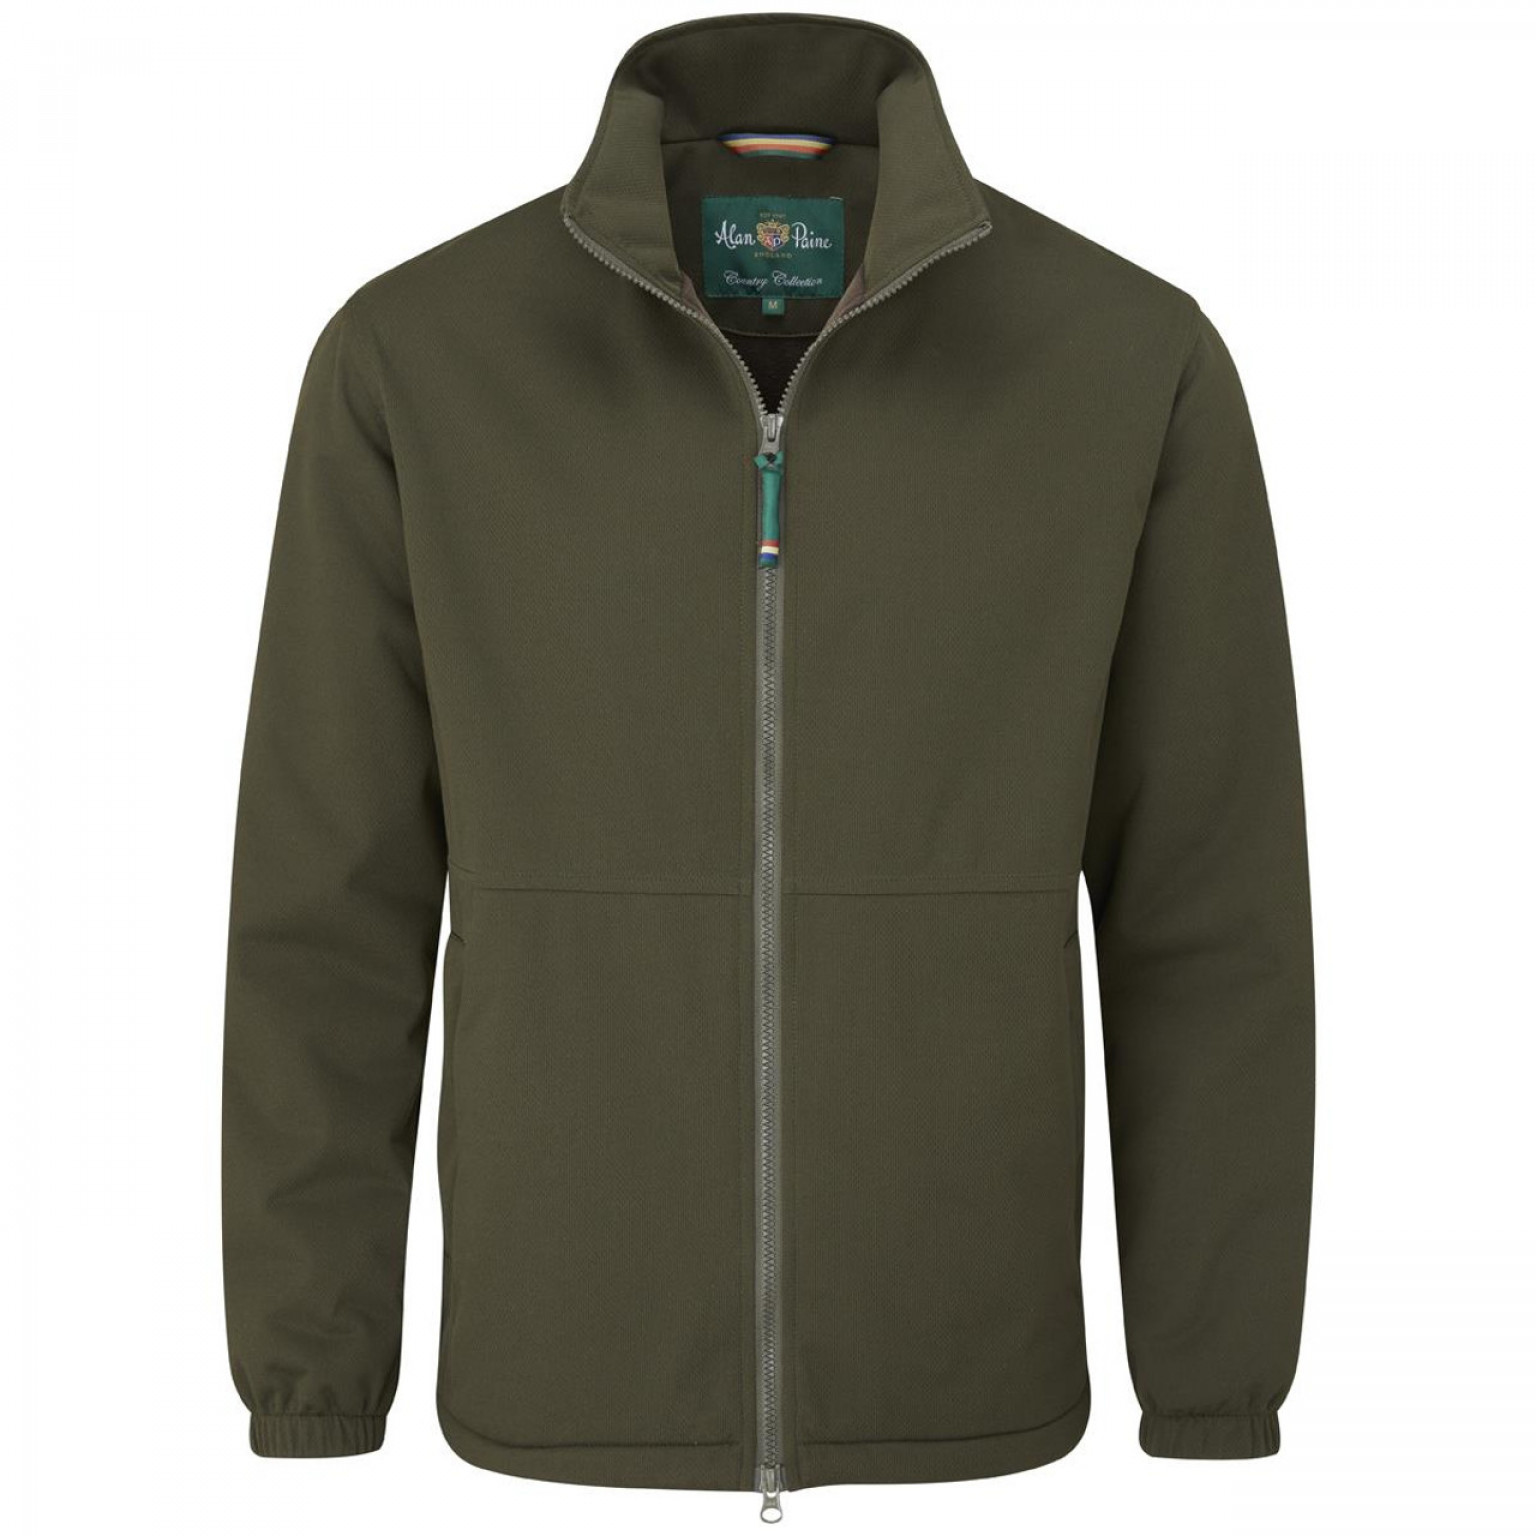 Alan Paine Mossley Wind Stopper Jacket Olive